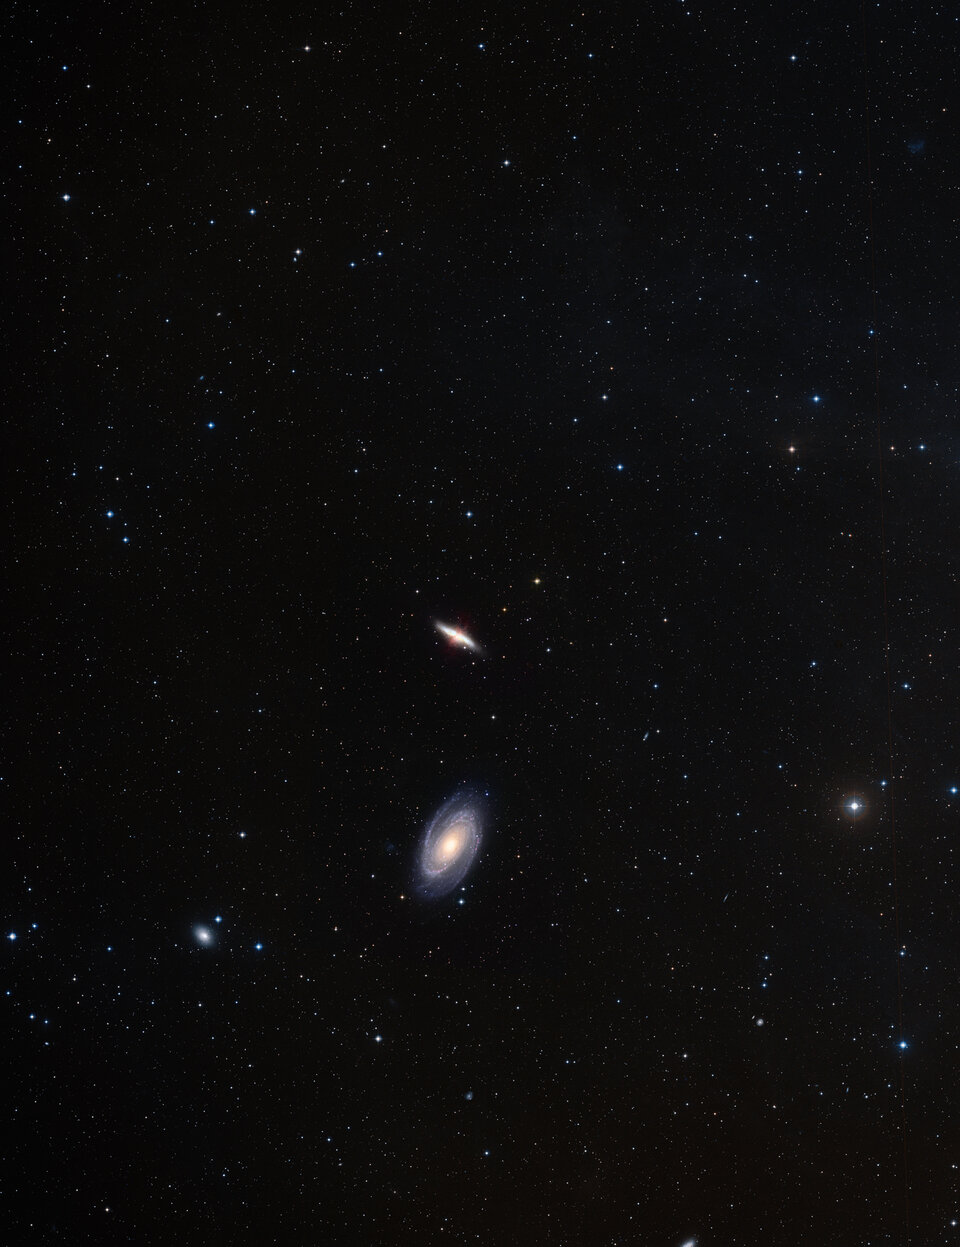 Galaxy pair M81 and M82